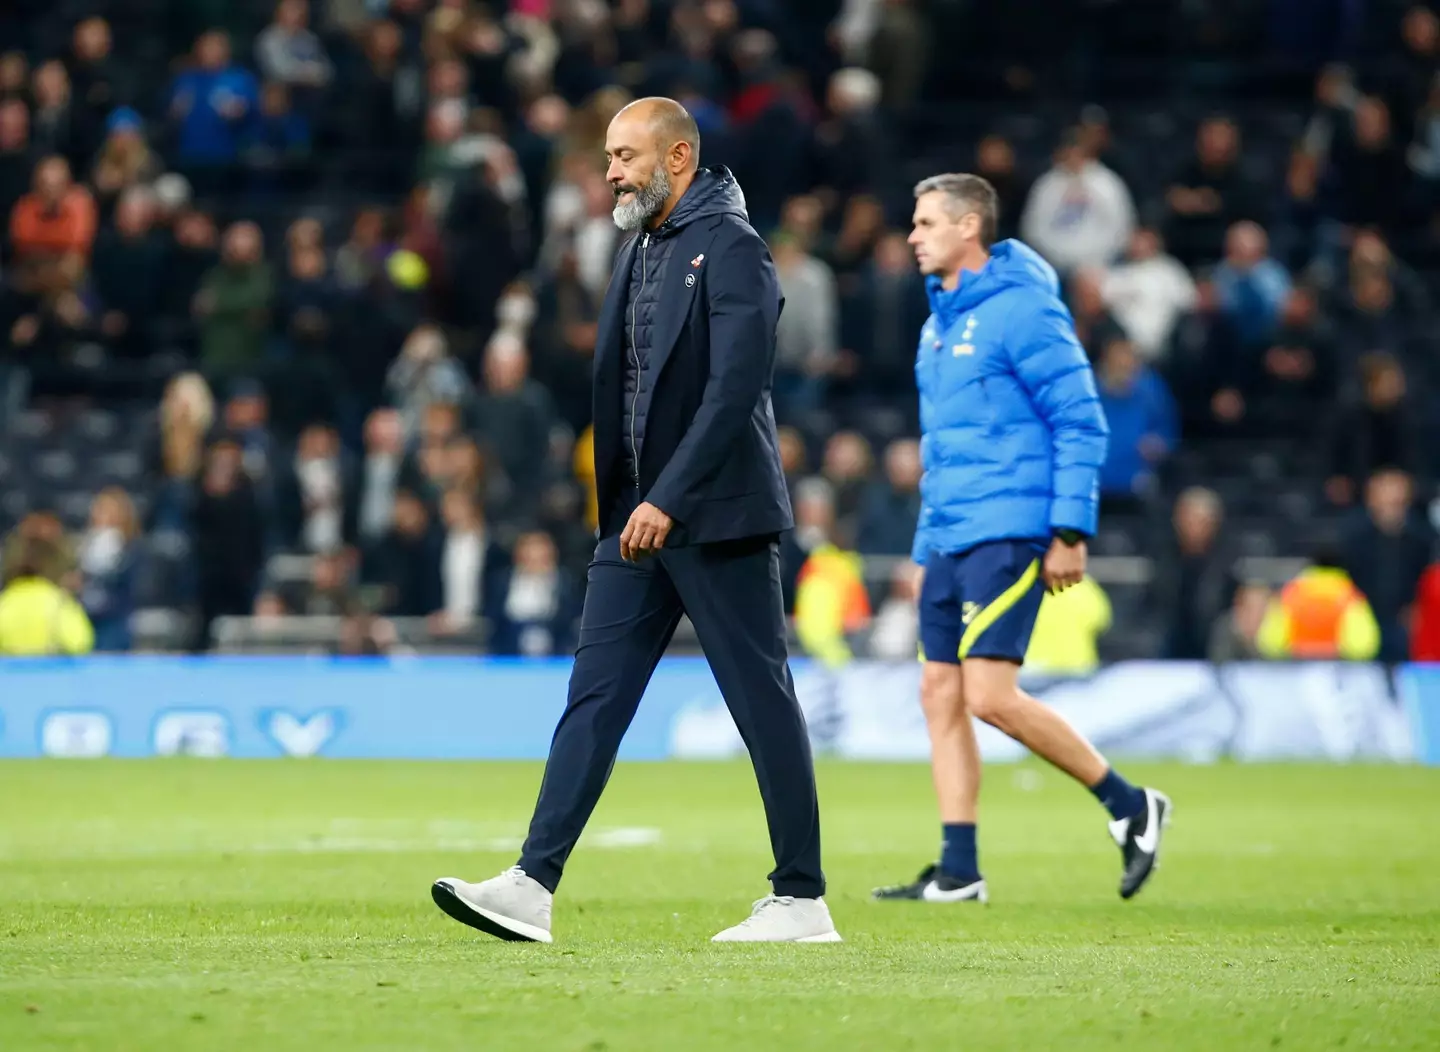 Nuno walks off the pitch following the loss to United. Image: PA Images